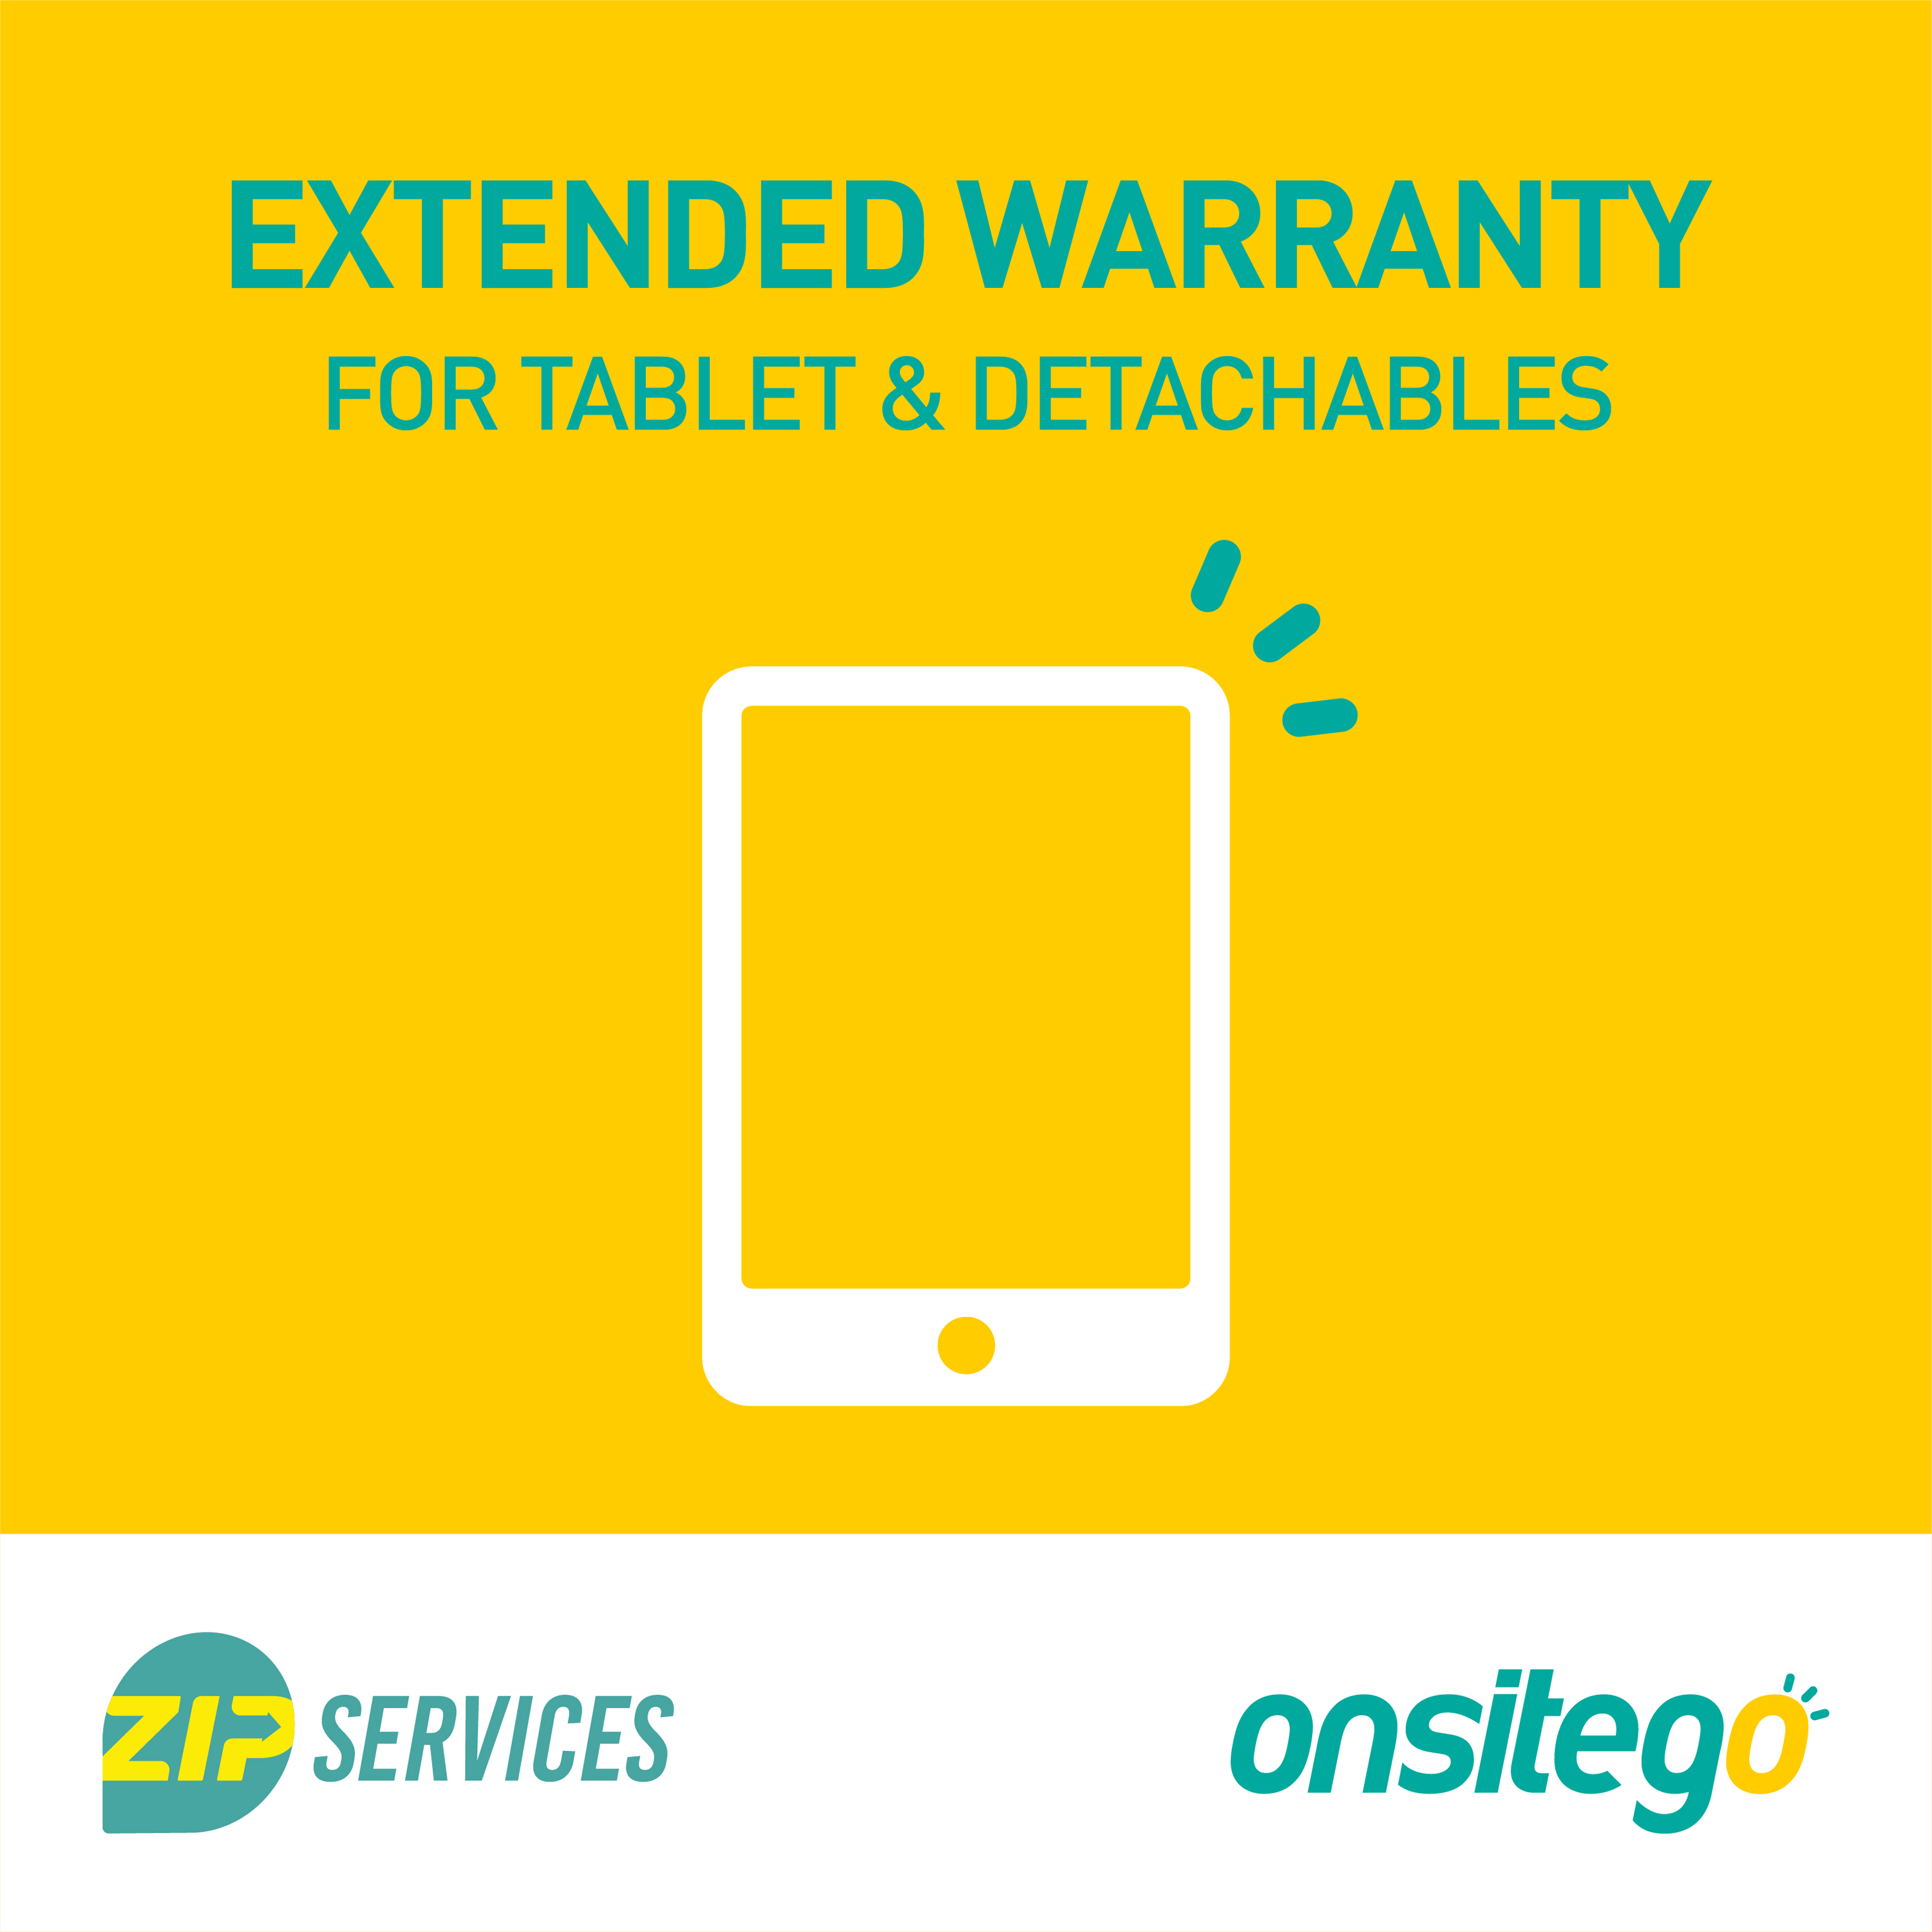 Onsitego 3 Months Extended Warranty for Tablets Rs.40001 - Rs.50000_1